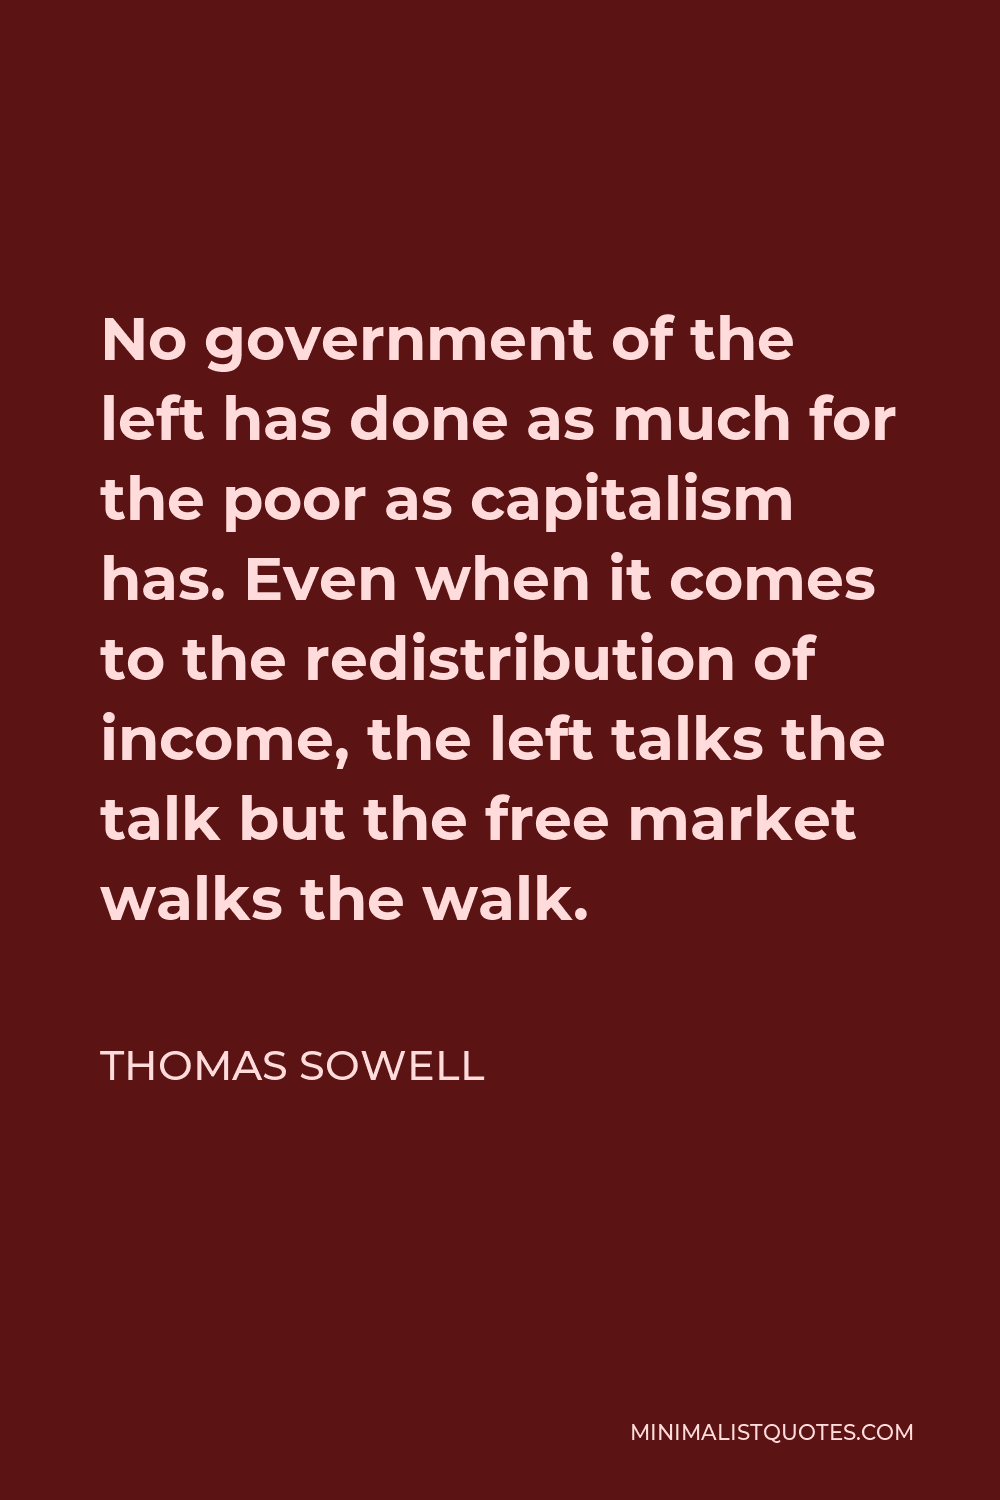 Thomas Sowell Quote - No government of the left has done as much for the poor as capitalism has. Even when it comes to the redistribution of income, the left talks the talk but the free market walks the walk.